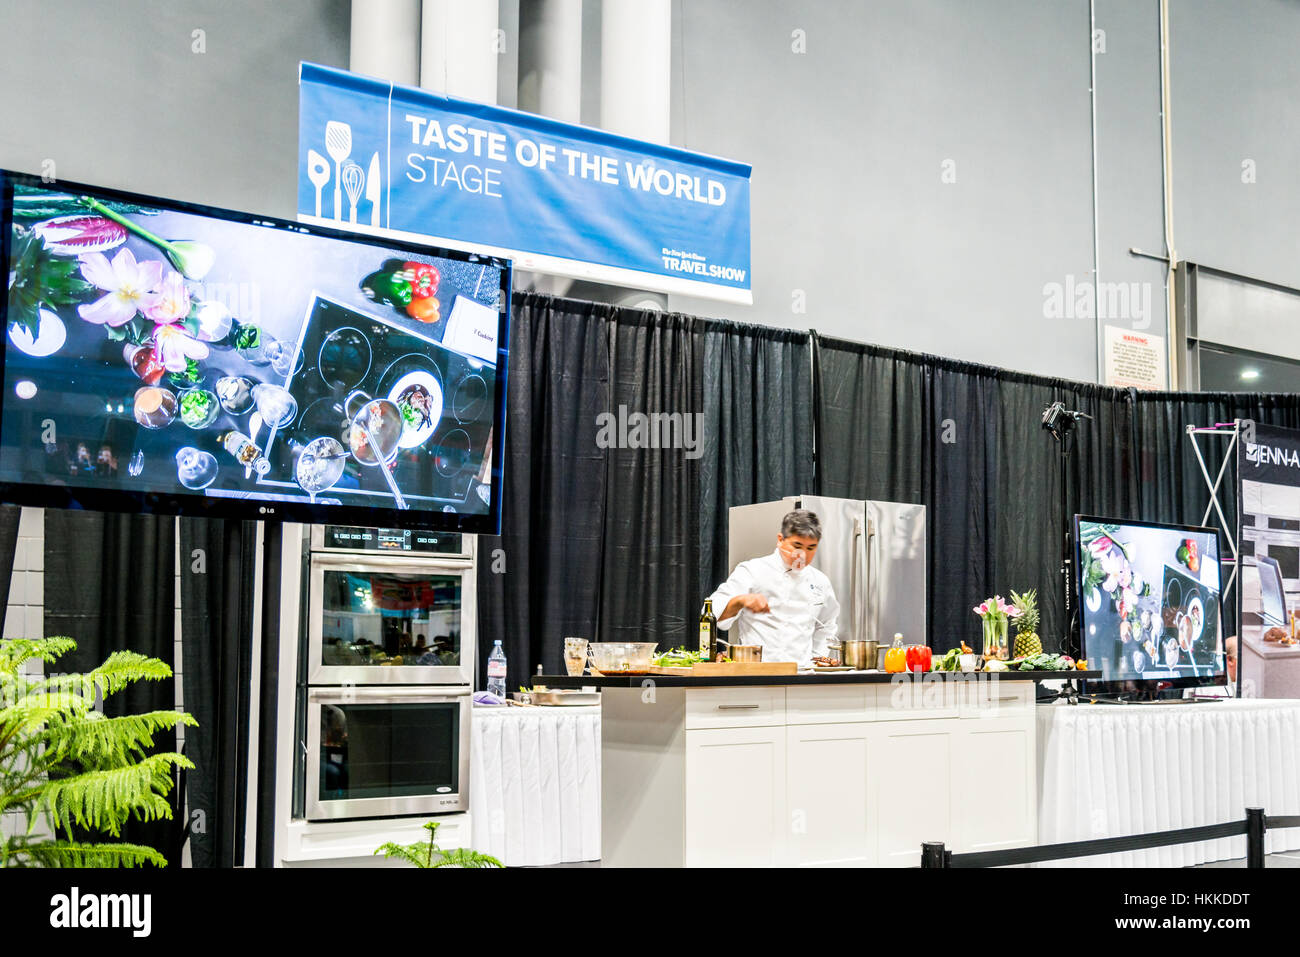 New York, USA. 28th January, 2017. International cooking demonstrations at The New York Times Travel Show, the largest consumer travel and trade show in North America opens at the Jacob Javits Center. Doors open to the public on Saturday and Sunday (Jan. 28-29) for two days of on-site deals and offers, travel seminars, tips from professionals and Meet the Experts programs, stage performance. Credit: Jim DeLillo/Alamy Live News Stock Photo